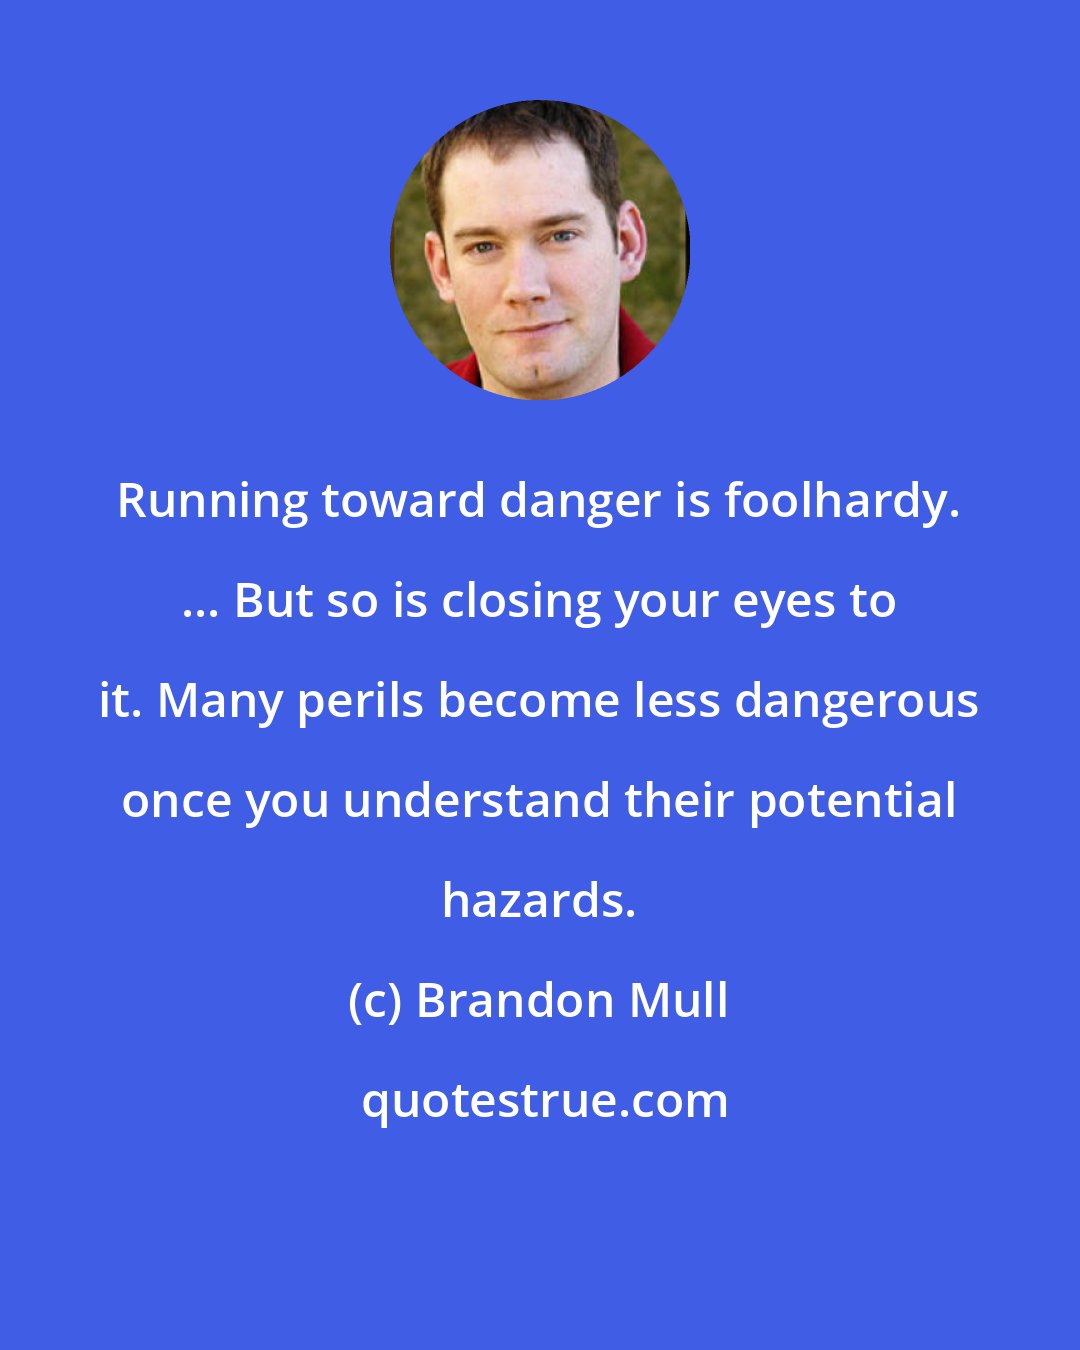 Brandon Mull: Running toward danger is foolhardy. ... But so is closing your eyes to it. Many perils become less dangerous once you understand their potential hazards.